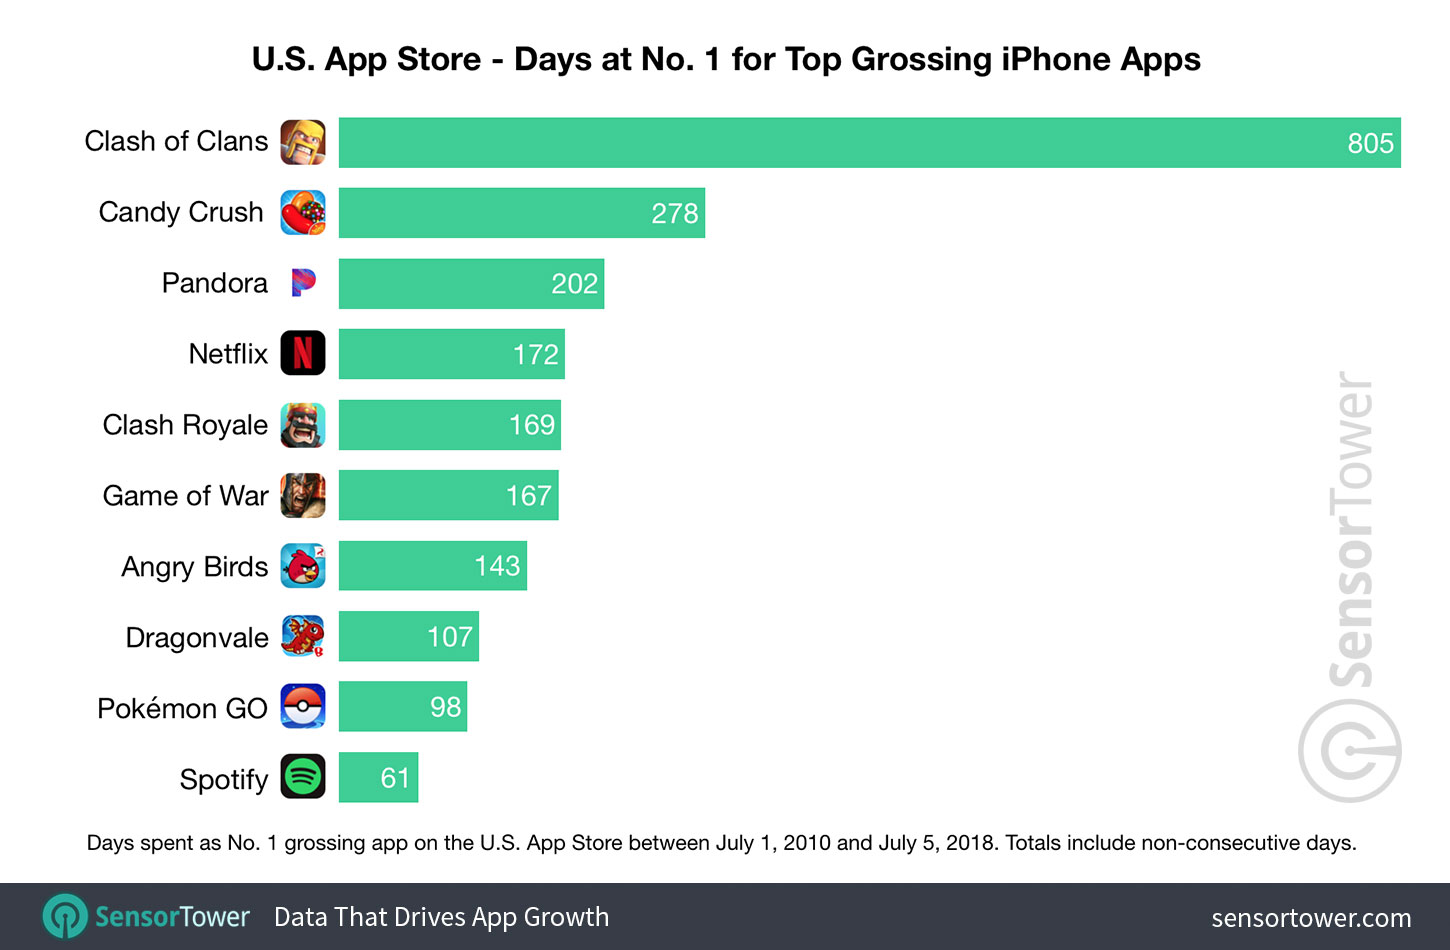 Chart showing a ranking of apps by number of days spent as No. 1 top grossing iPhone app on the U.S. App Store